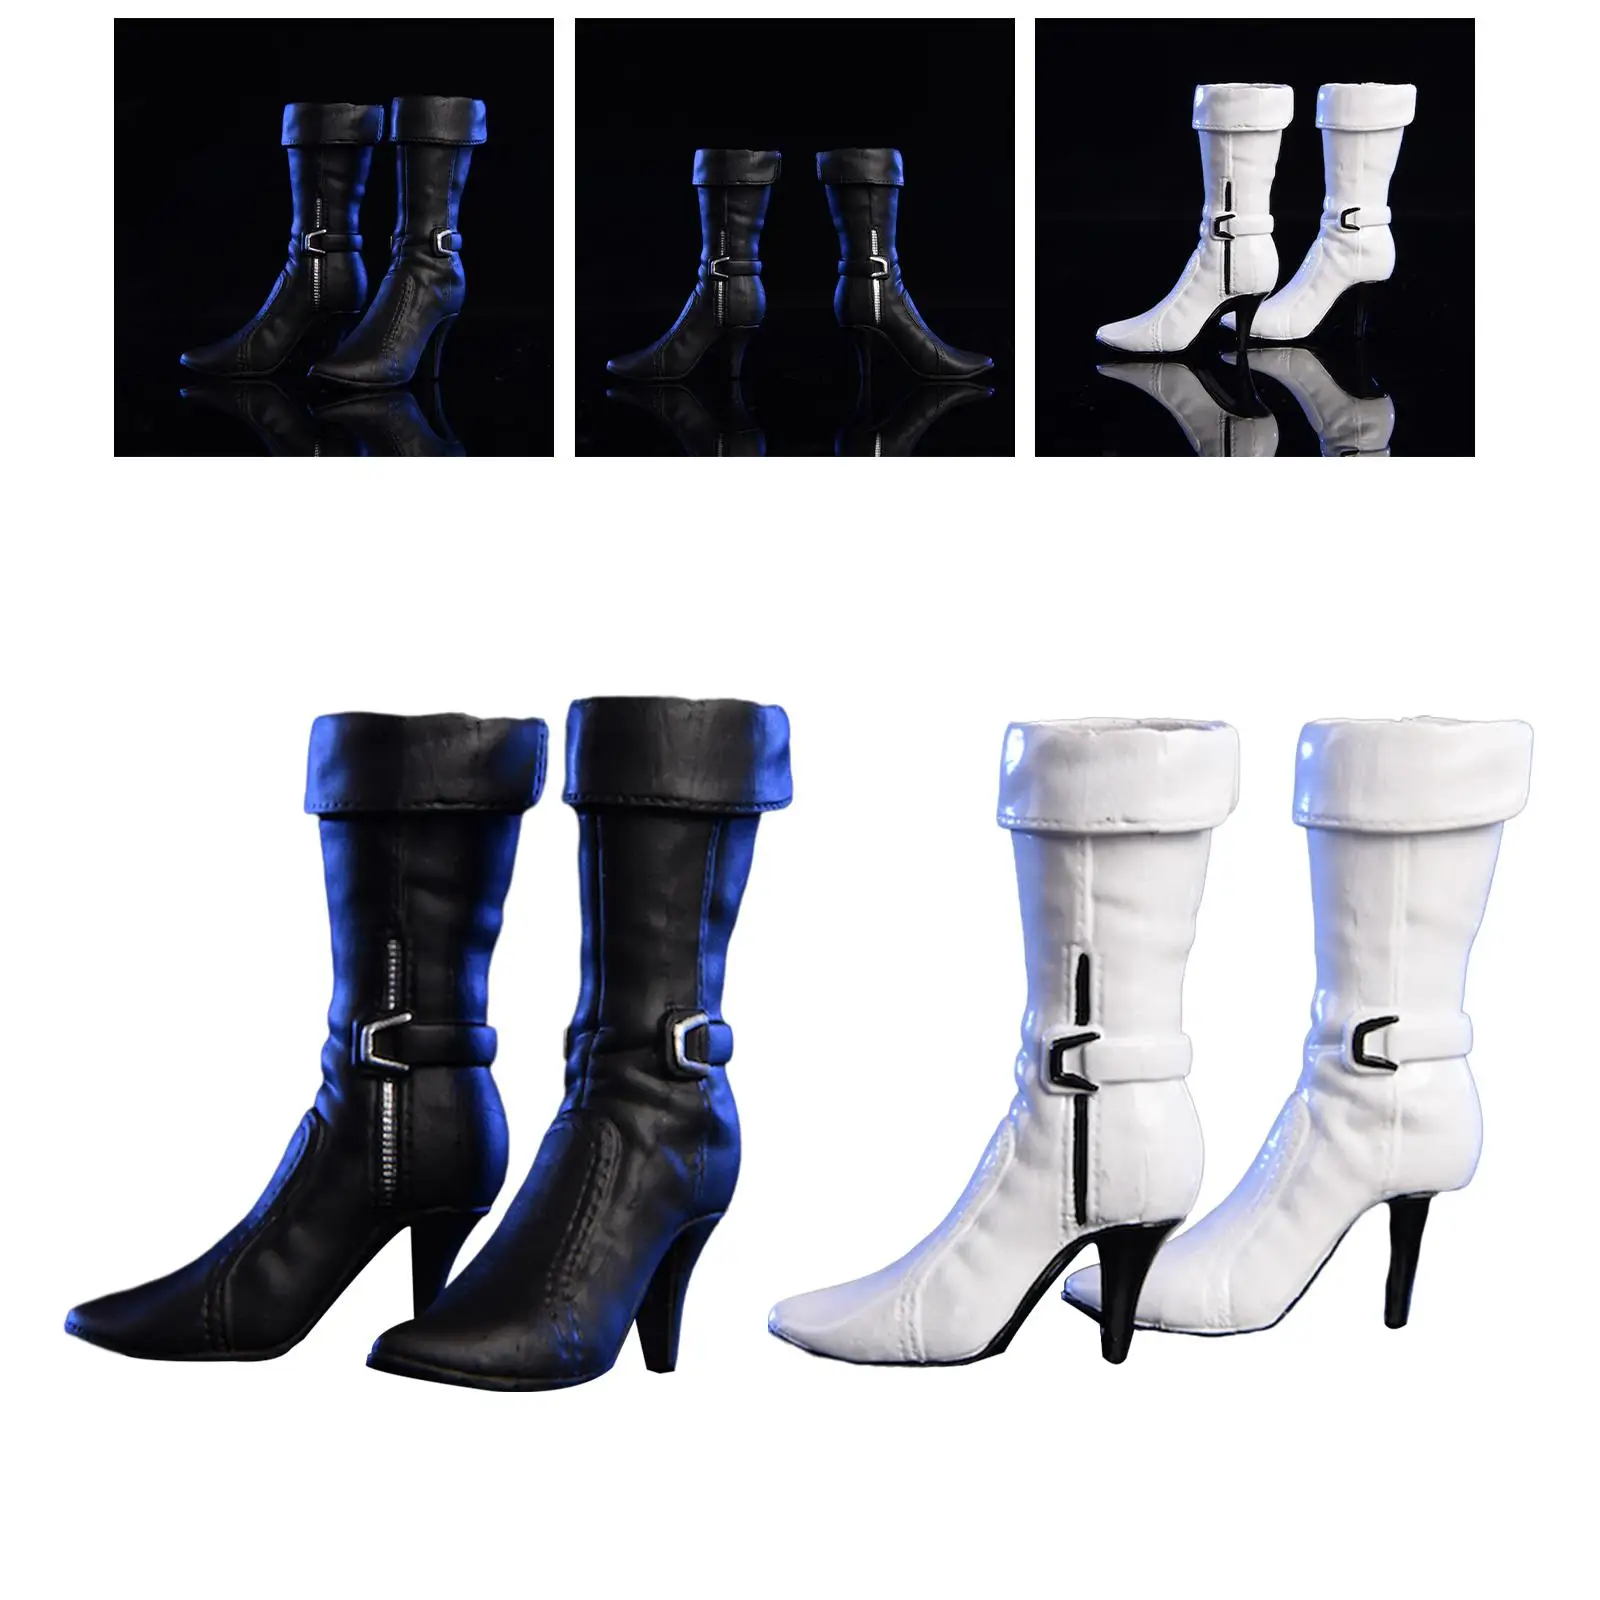 1/6 Scale Figure Shoes Handmade PU 3.5 cm Length Shoes High Heeled Shoes for 12 inch Female Action Figure Accessories